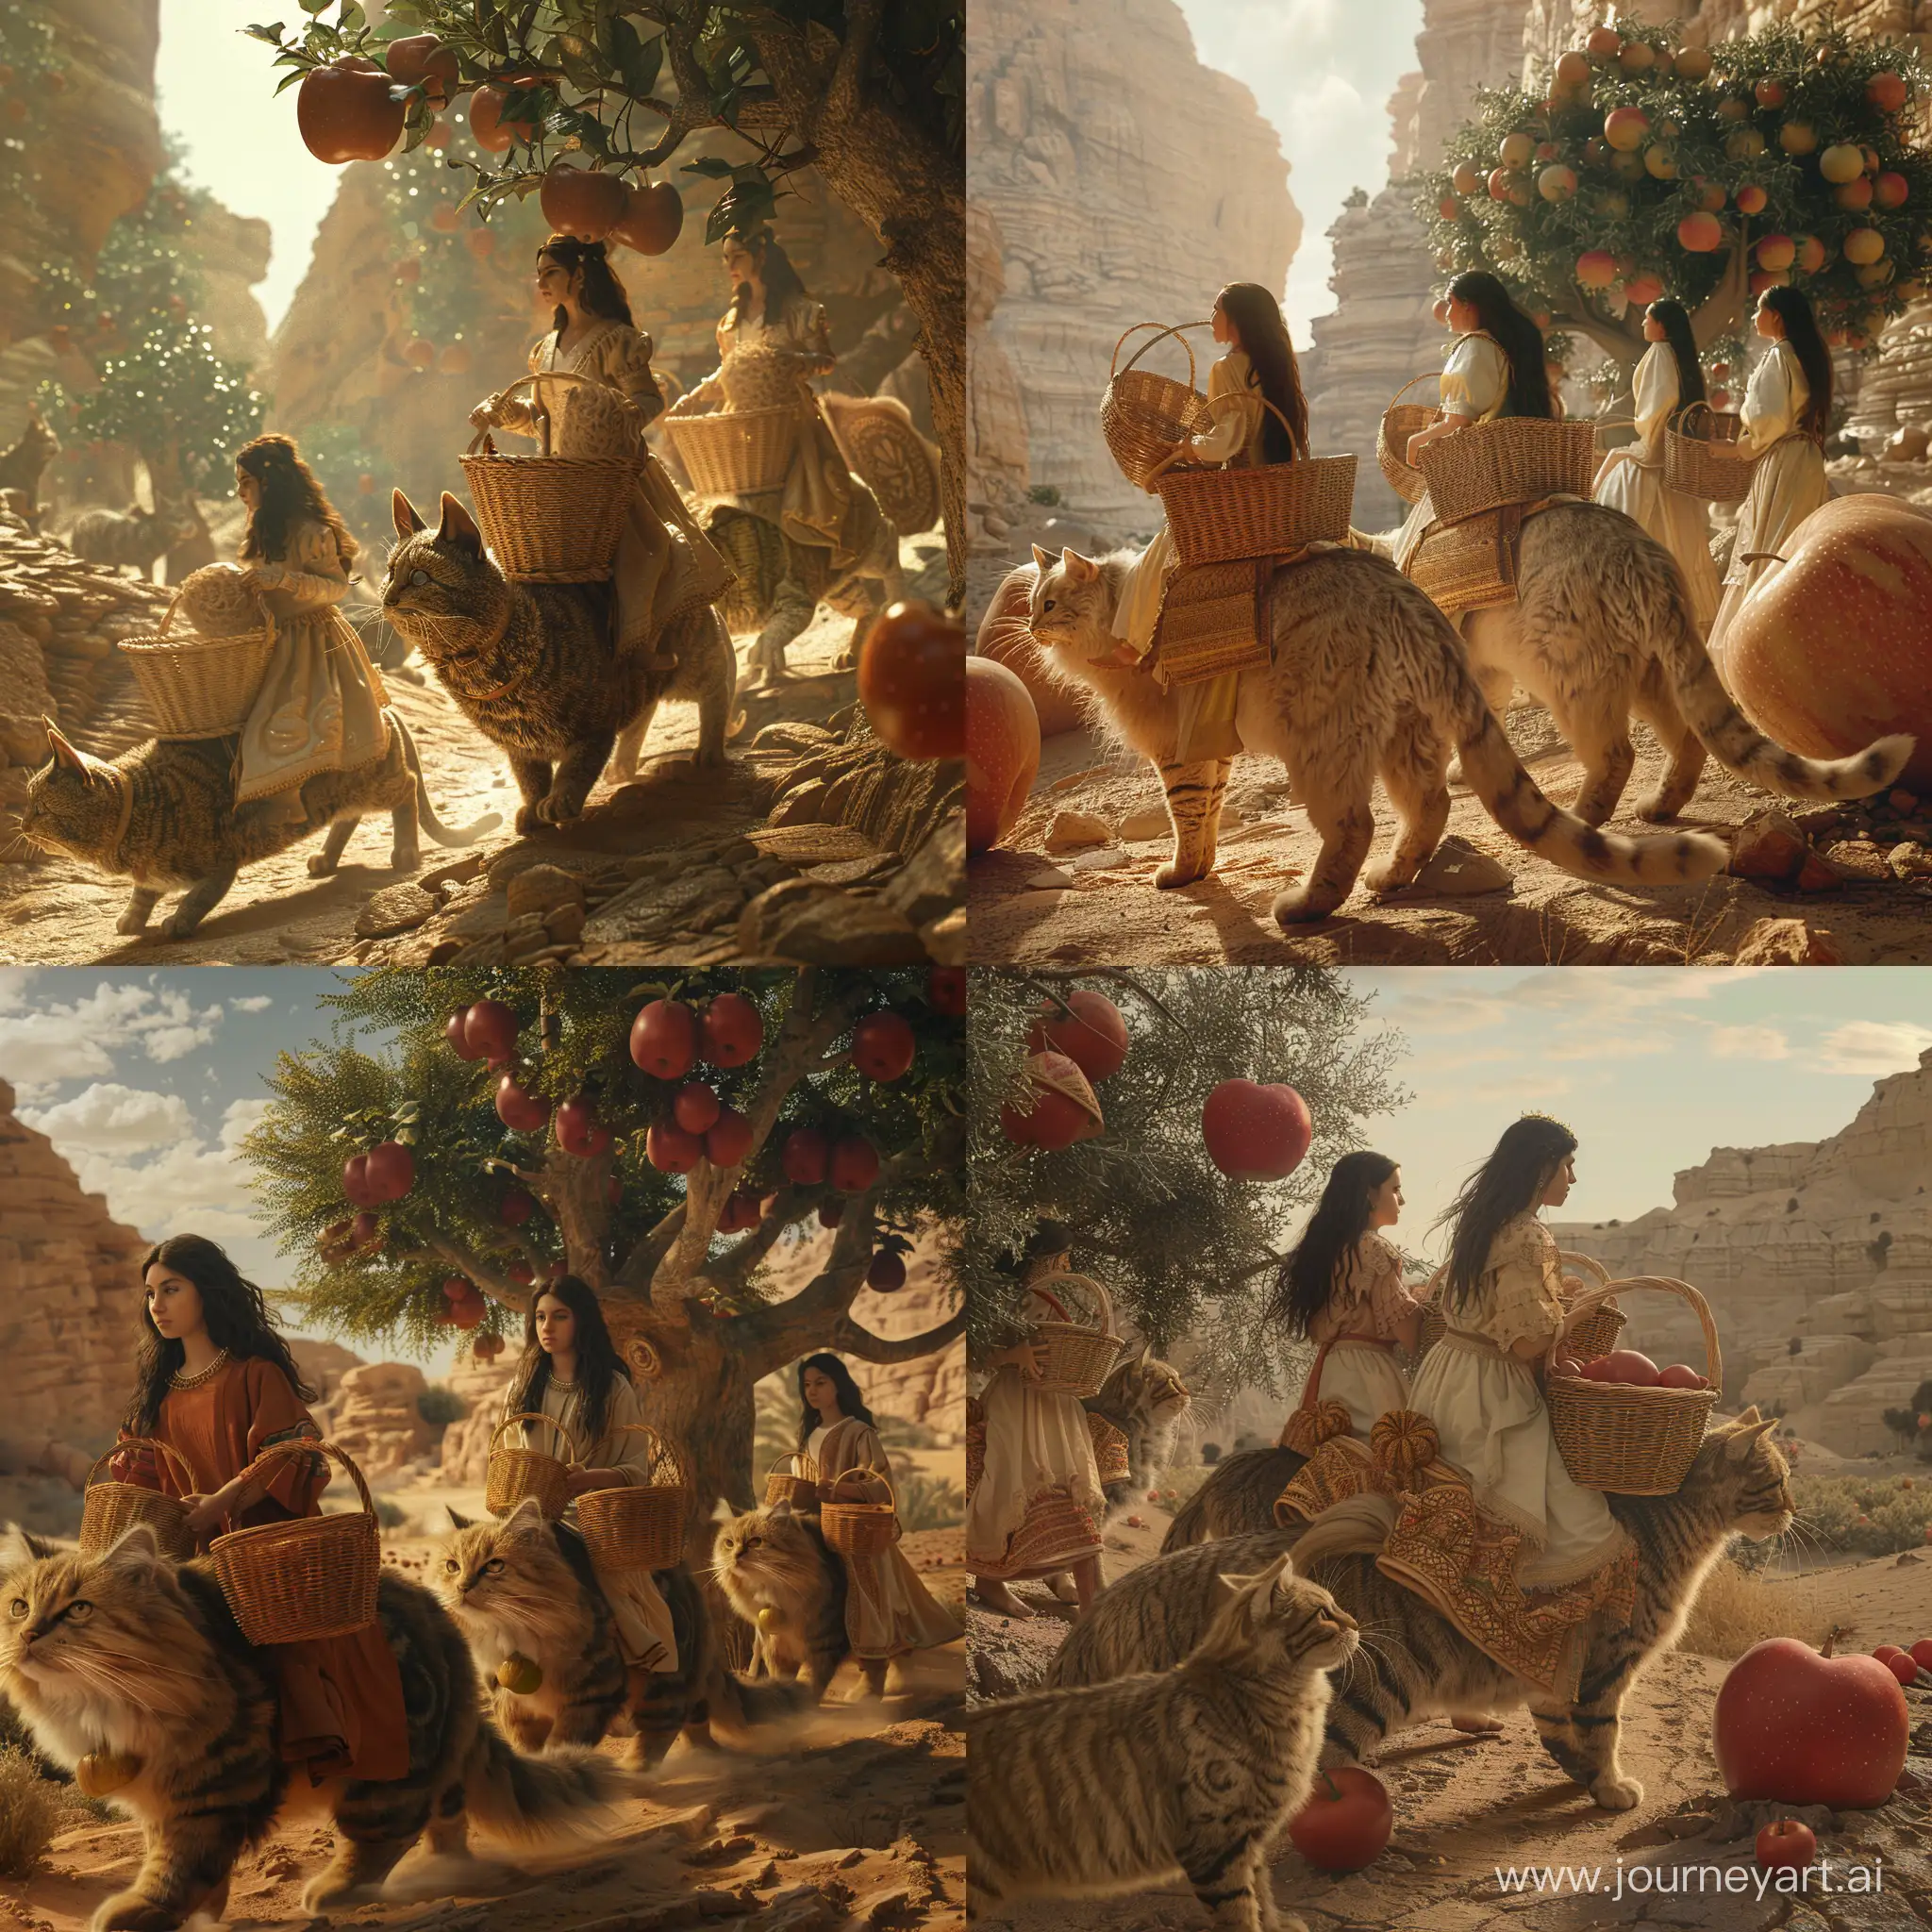 Young Persian women, riding giant Persian cats, holding wicker baskets, approach a giant apple tree with apples as large as watermelons. in a desert, in an ancient civilization, cinematic, epic realism,8K, highly detailed, long shot technique, backlit